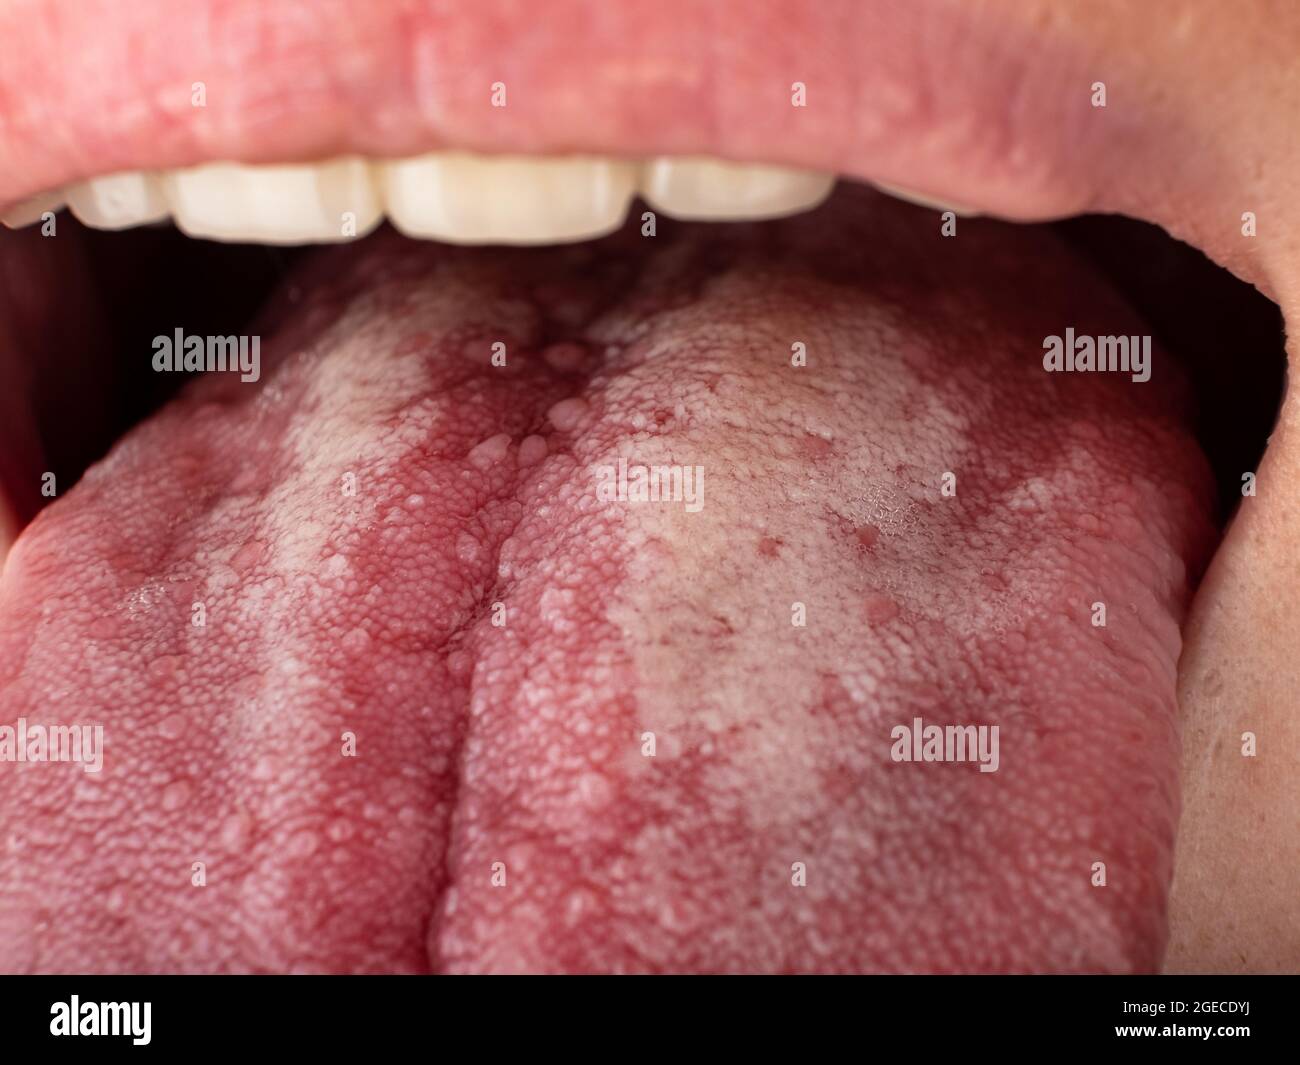 tongue with stomatitis close up, oral cancer. Stock Photo